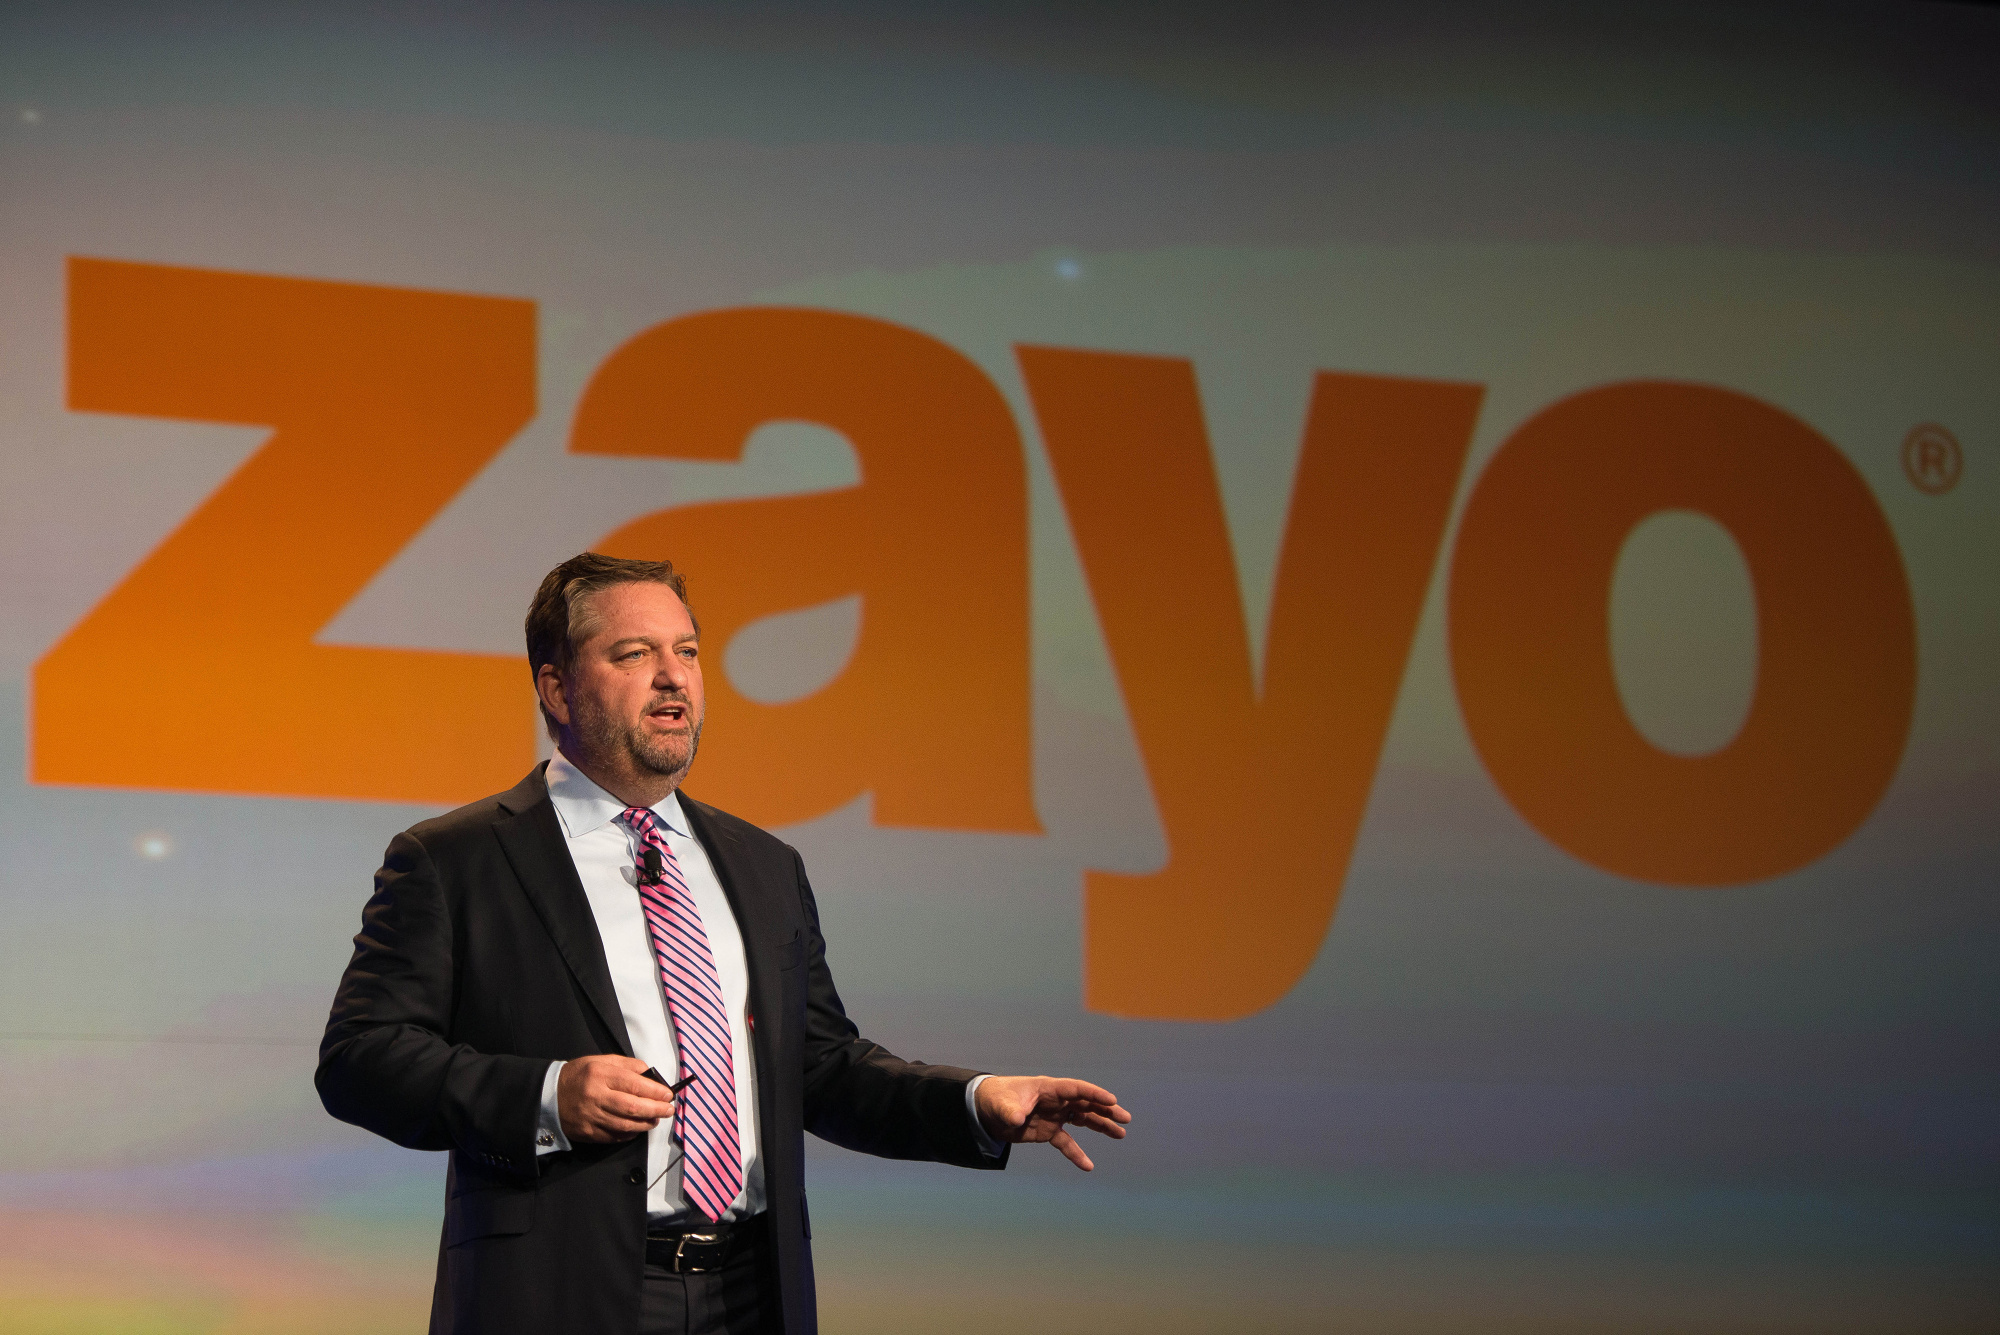 Daniel Caruso, chief executive officer of ZAYO Group.